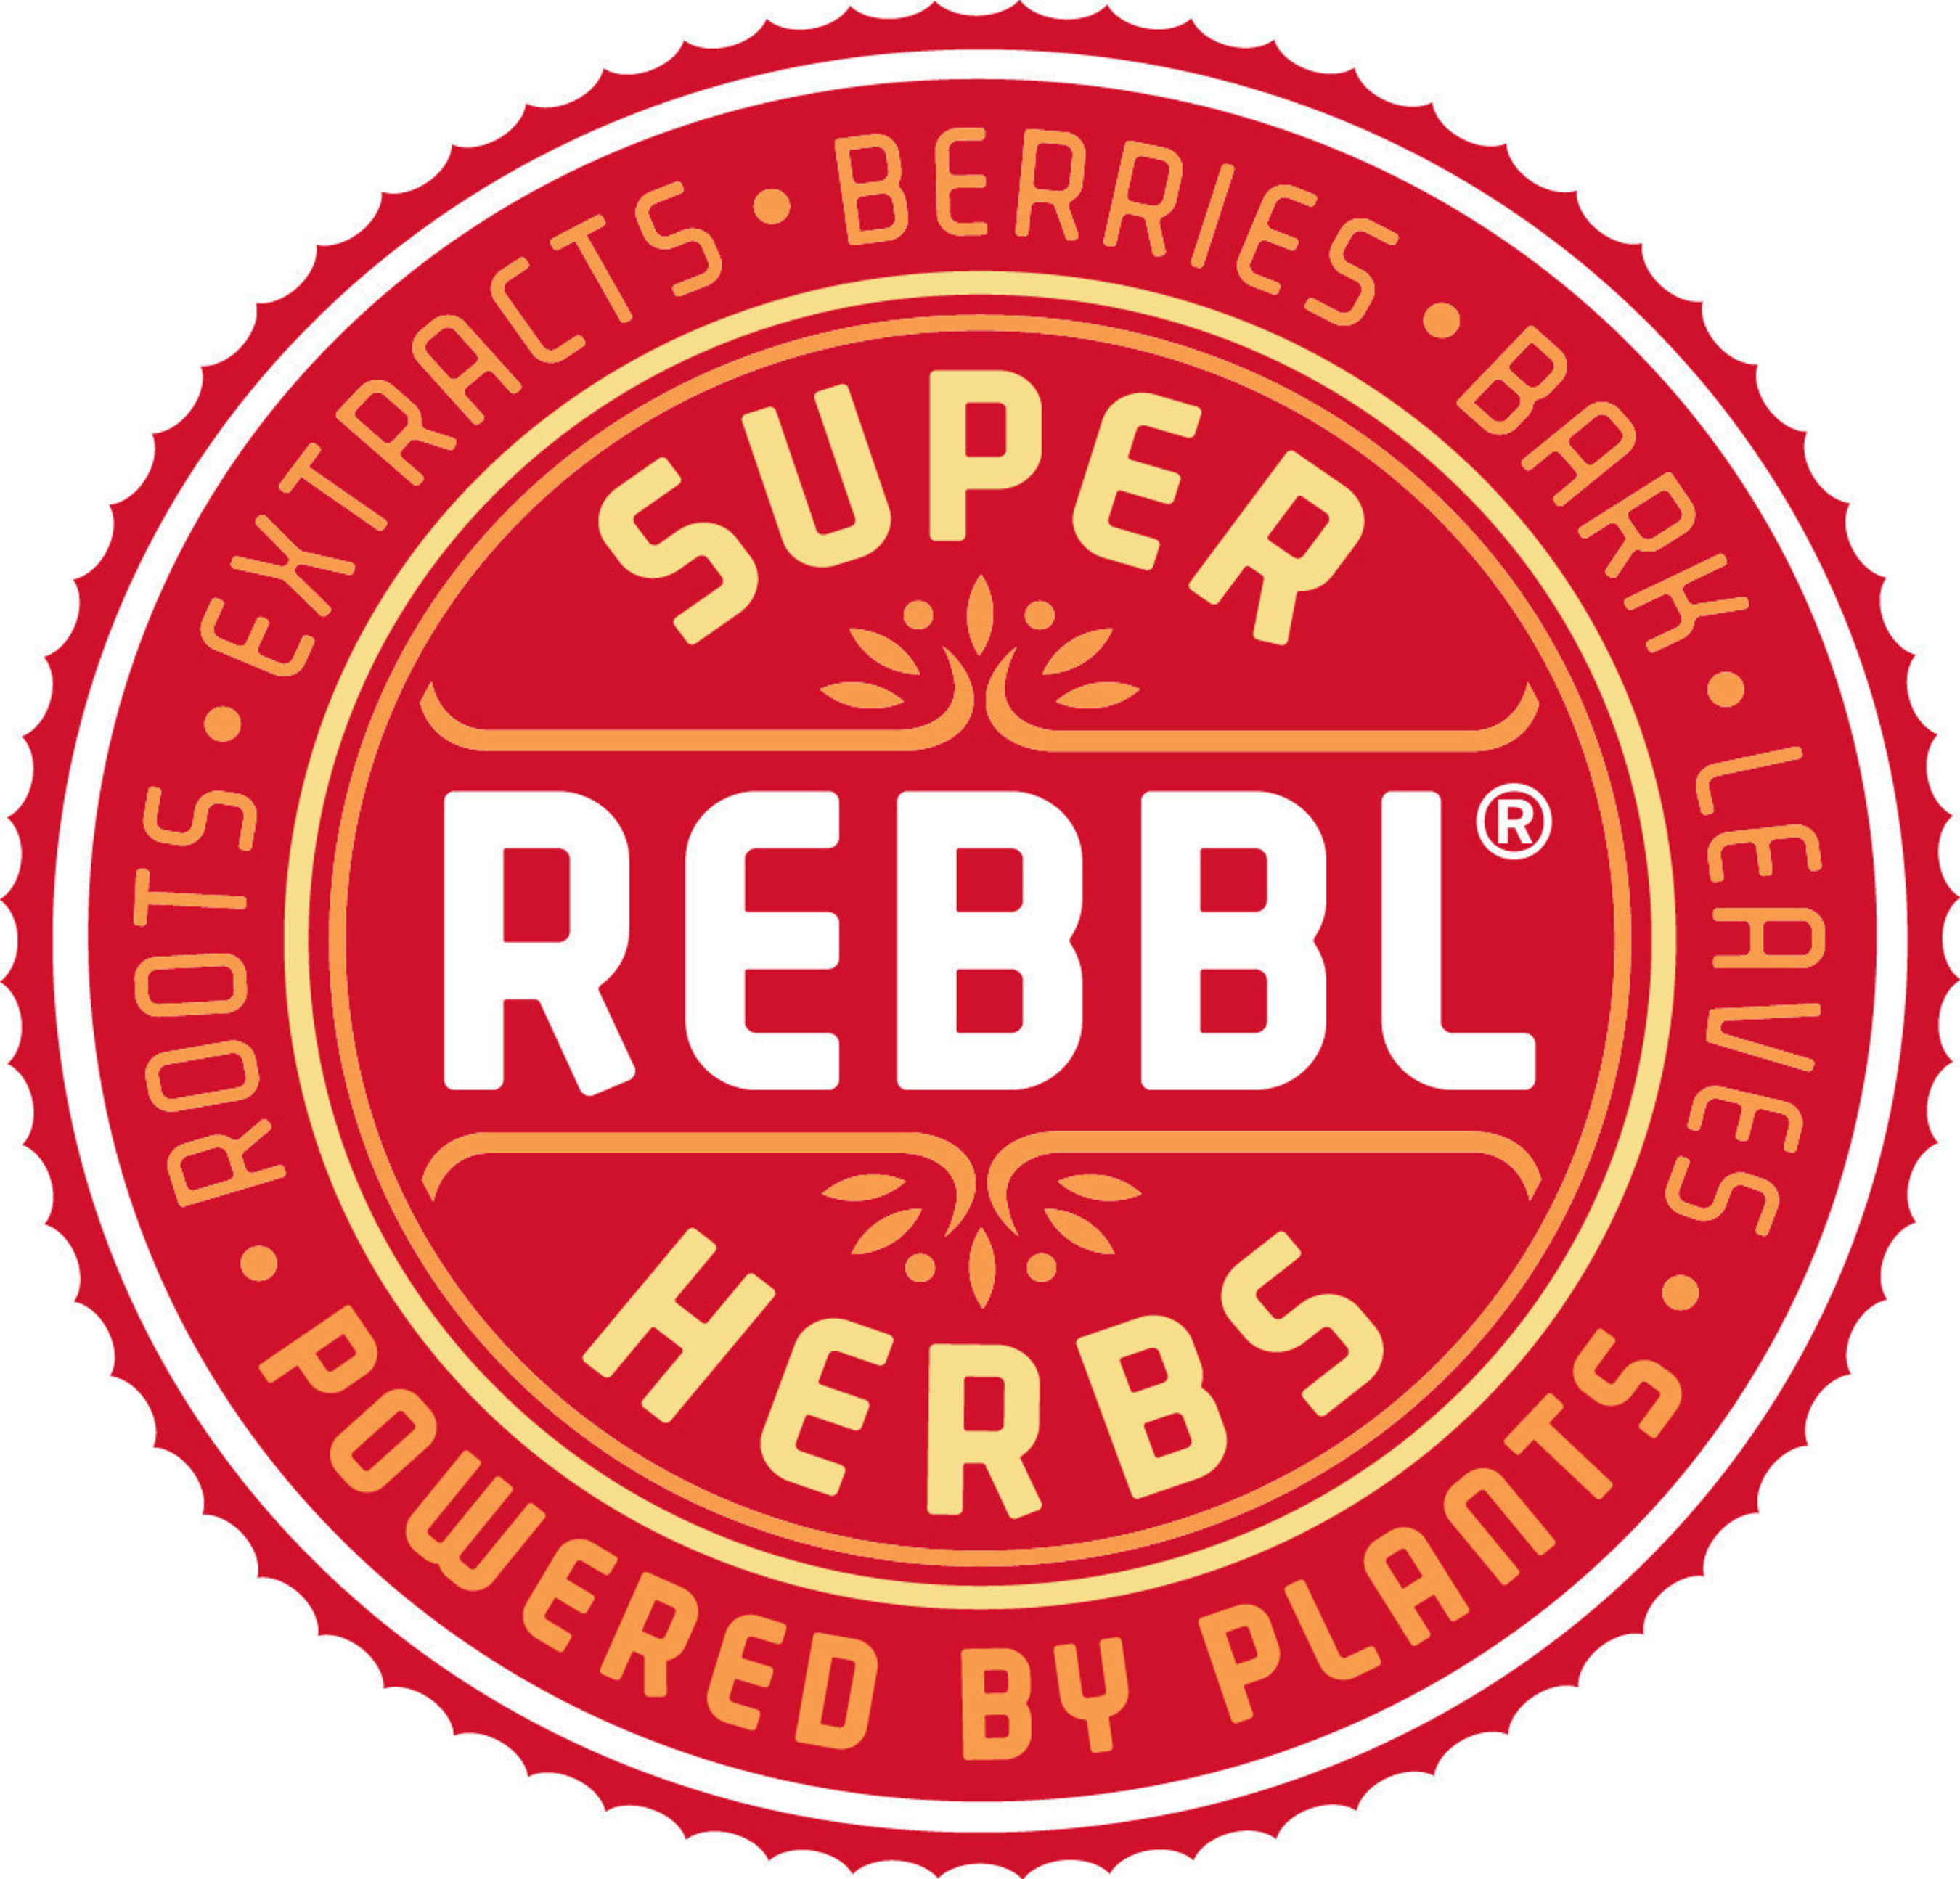 REBBL, maker of organic super-herb powered Coconut-Milk Elixirs and Proteins, announced it has closed a $10 million investment that will allow it to expand marketing efforts and bring the benefits of super-herbs to more people.